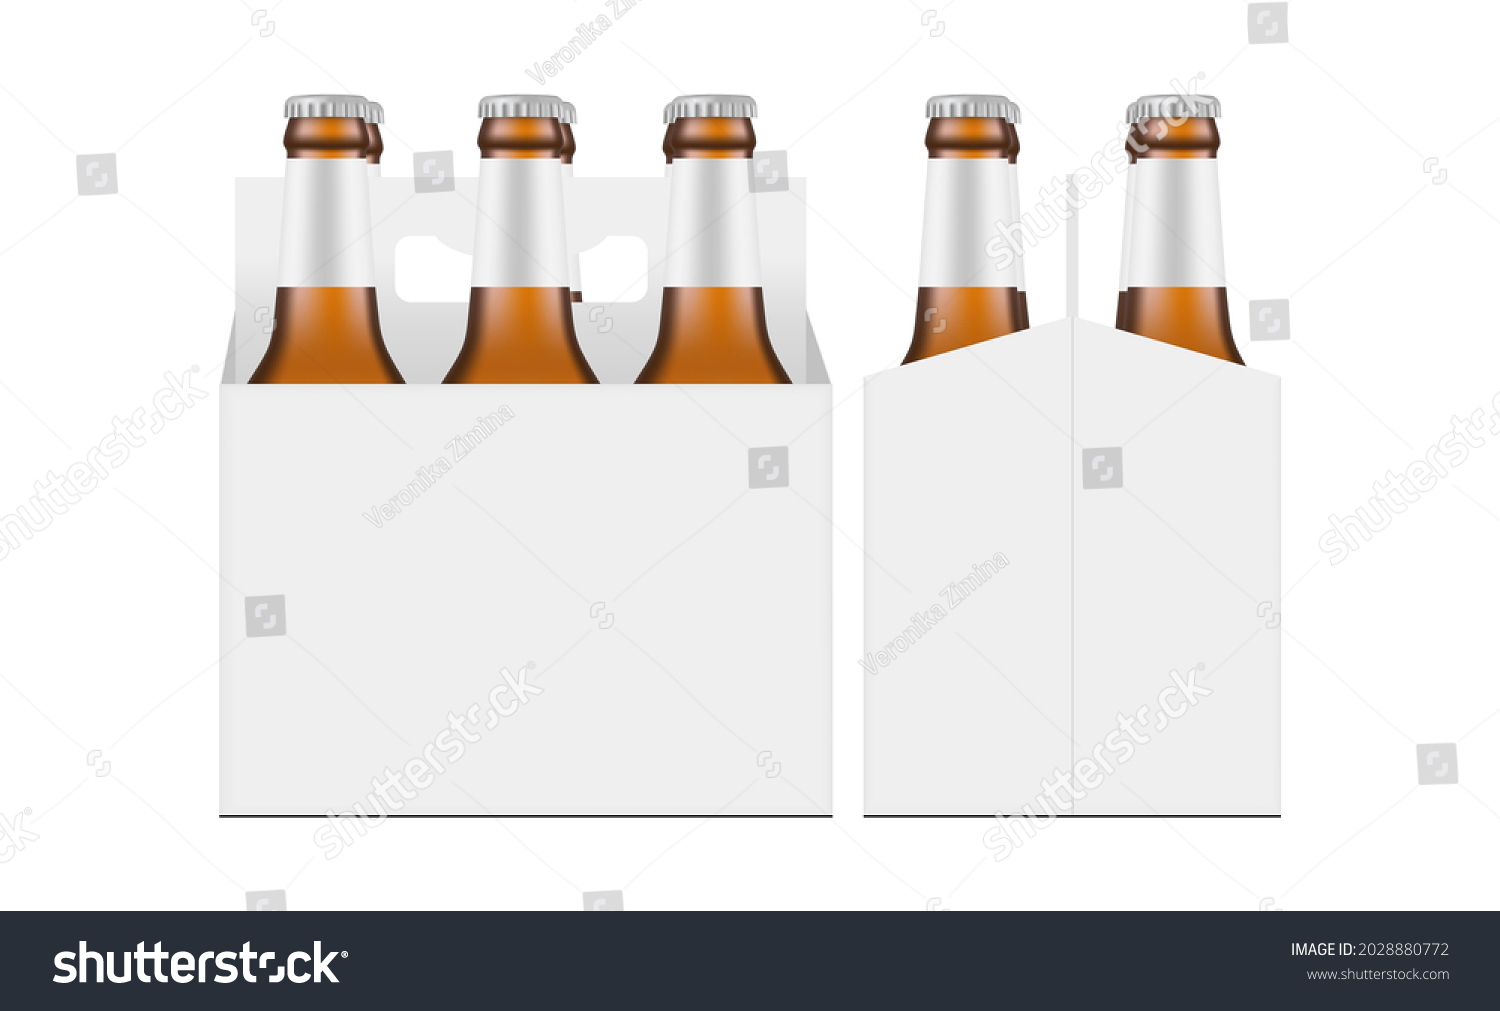 SVG of Carrier Box Mockup with Brown Glass Bottles, Front and Side View, Isolated on White Background. Vector Illustration svg